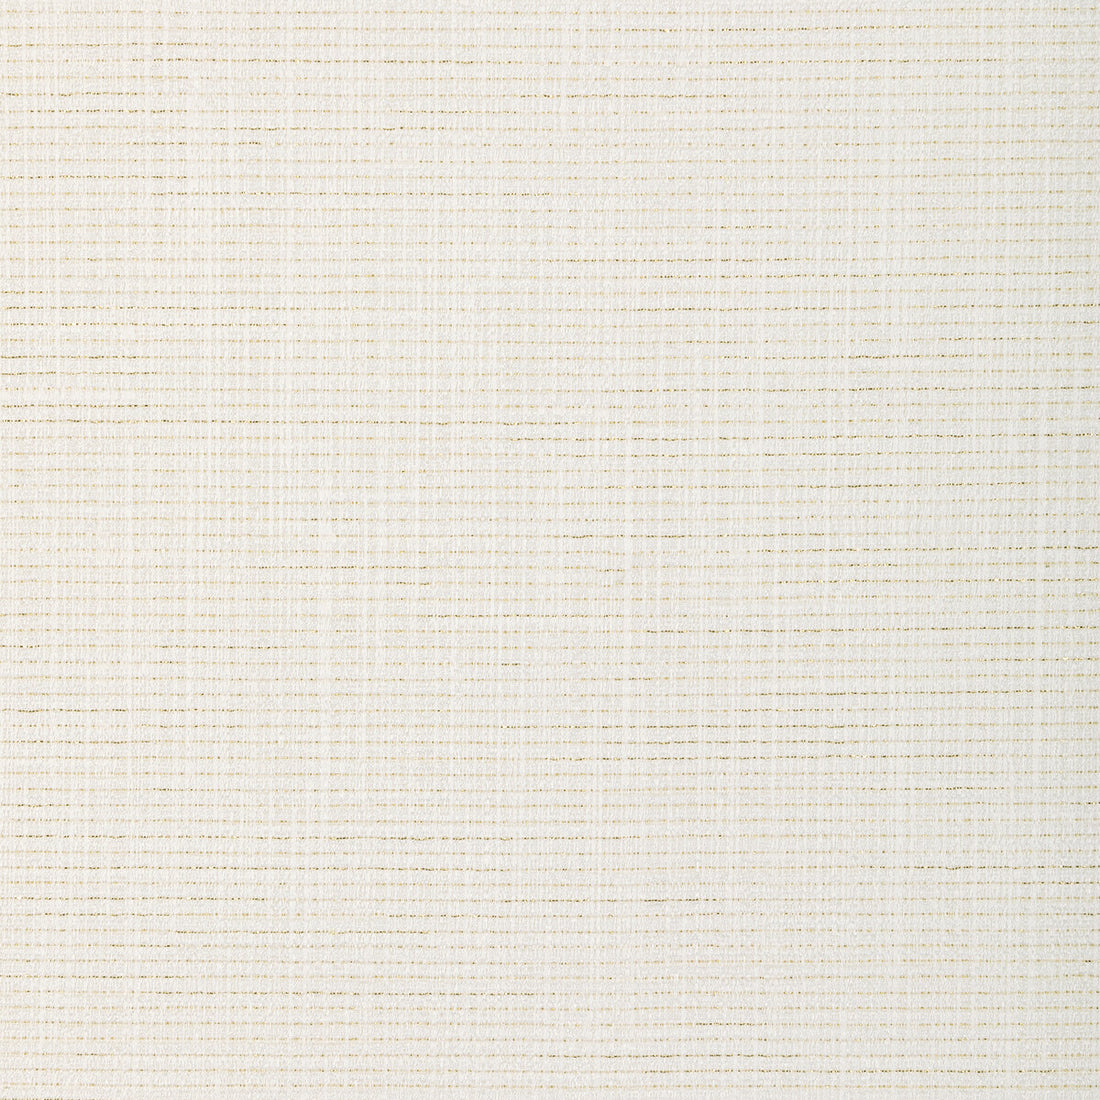 Soft Lights fabric in ivory gold color - pattern 36574.1614.0 - by Kravet Couture in the Modern Luxe Silk Luster collection